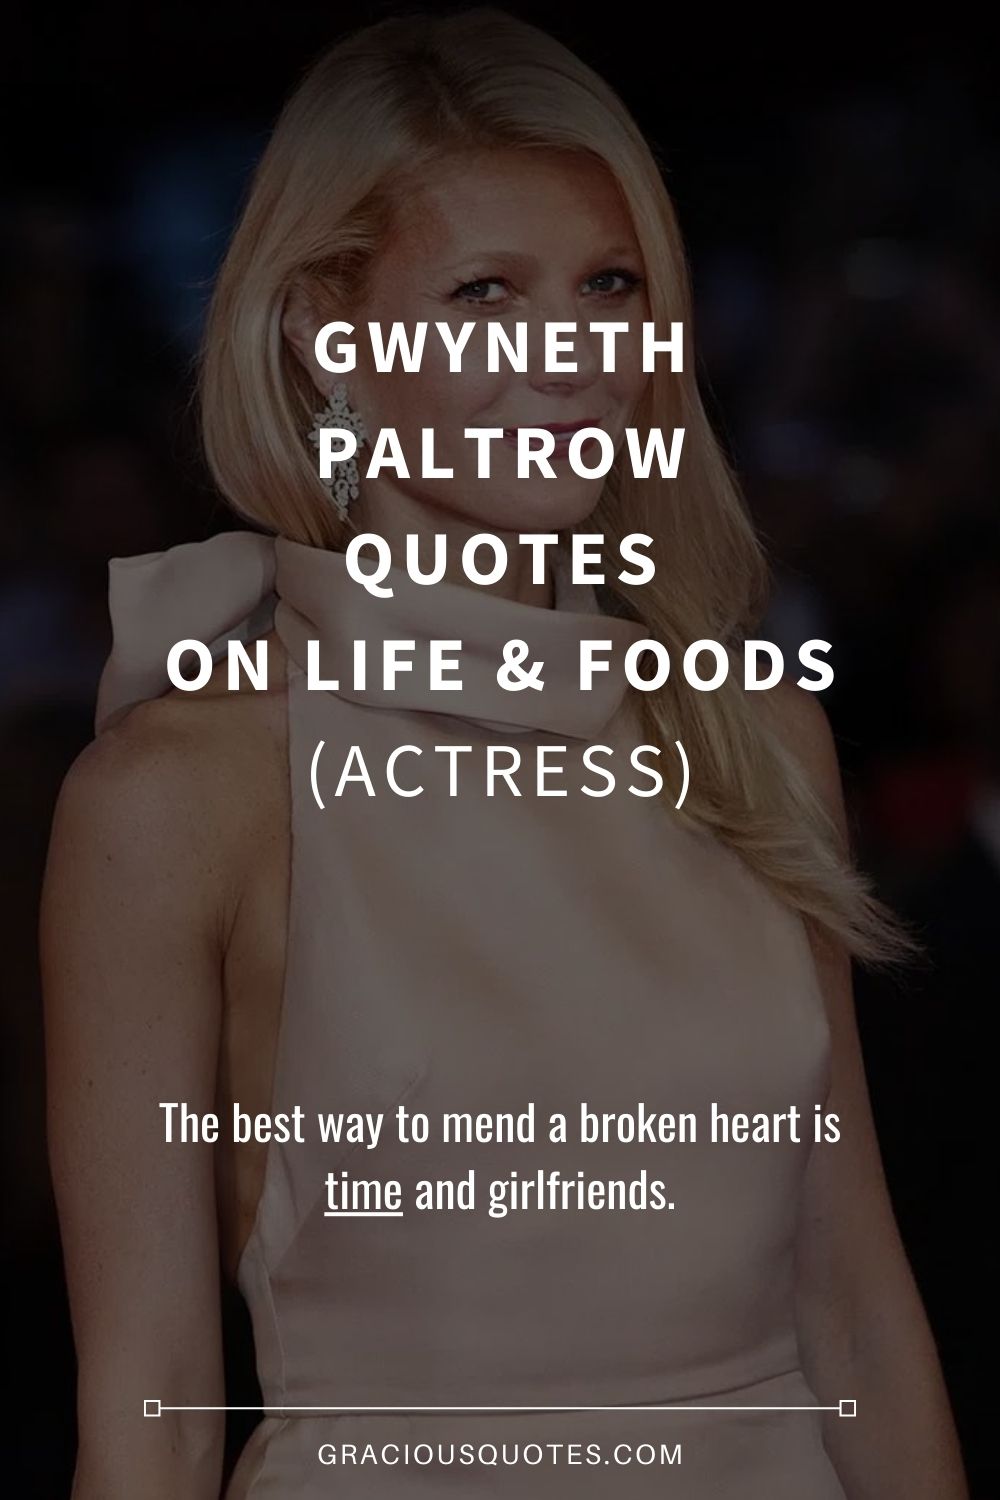 Gwyneth Paltrow Quotes on Life & Foods (ACTRESS) - Gracious Quotes